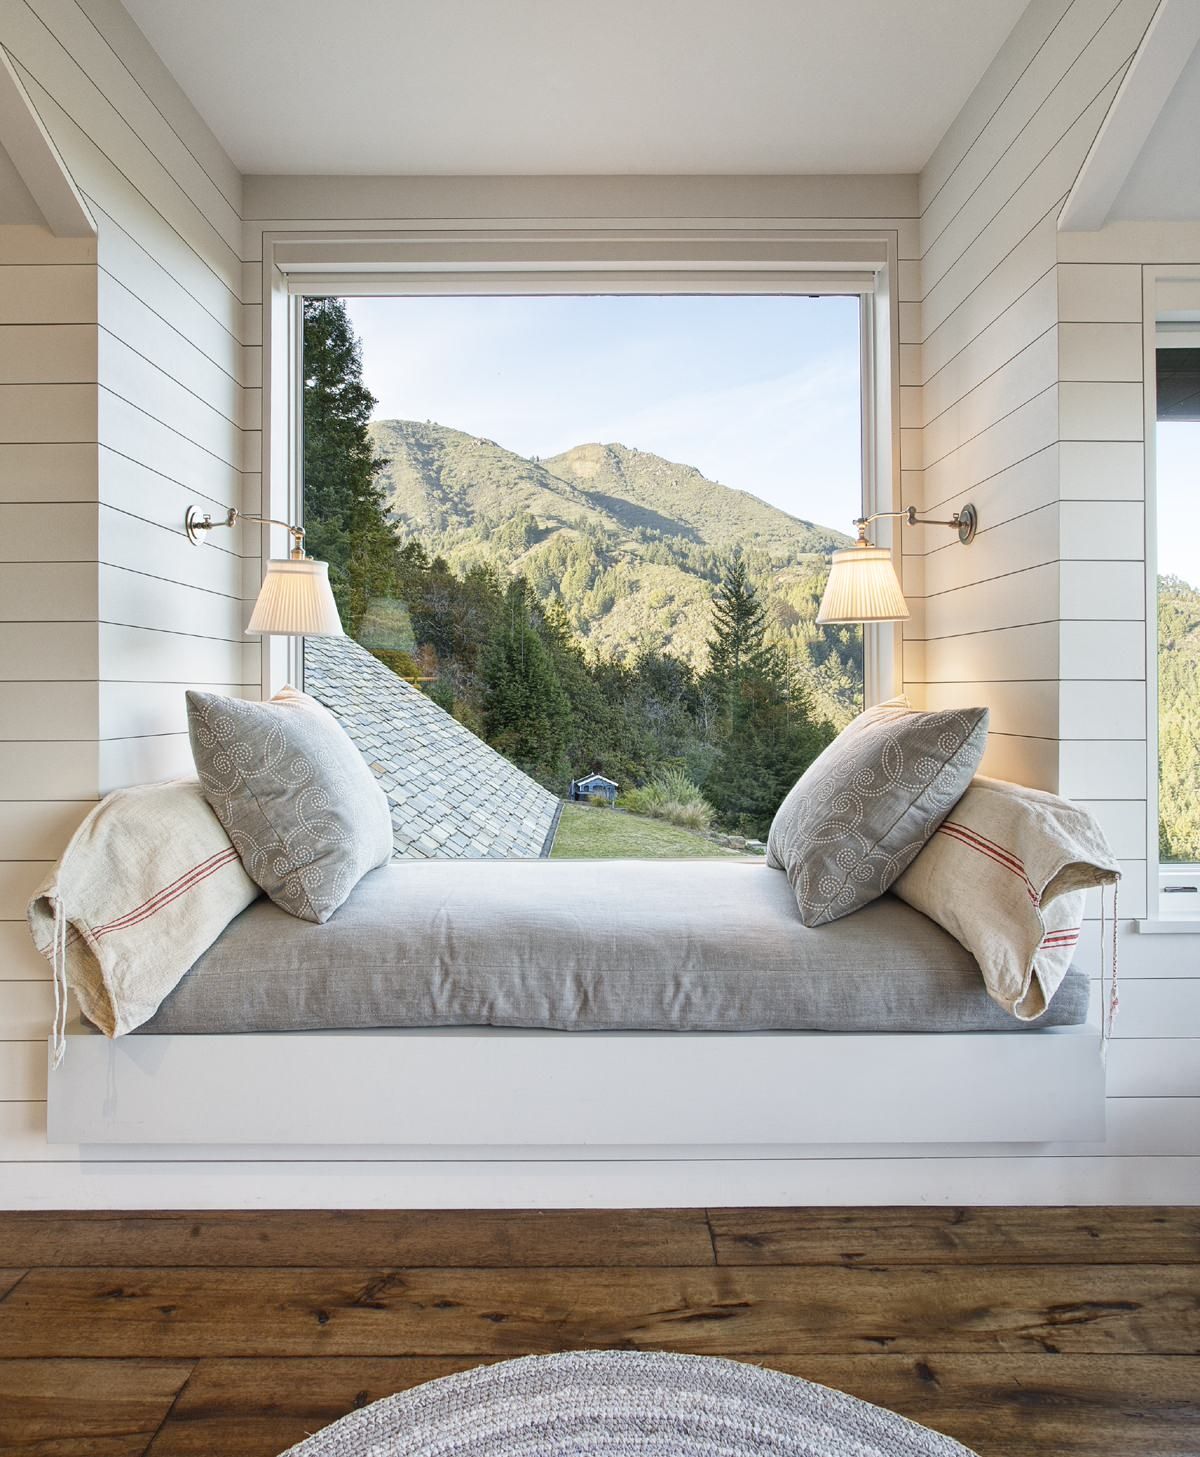 Window-seats-in-the-bedroom-can-offer-picturesque-views-of-the-landscape-outside-78265